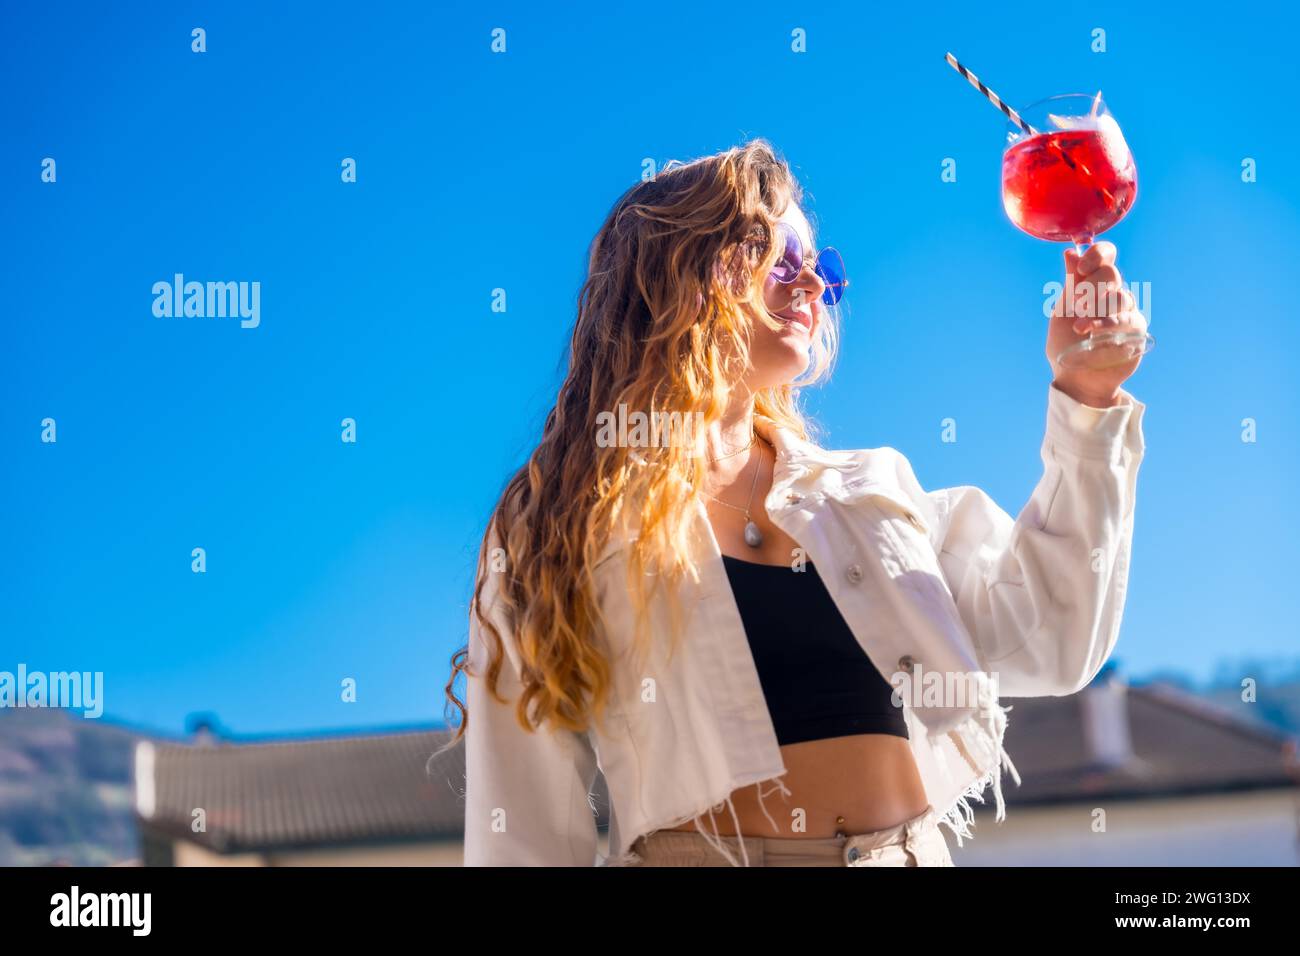 Blonde cool woman raising a cocktail glass during a rooftop summer party Stock Photo